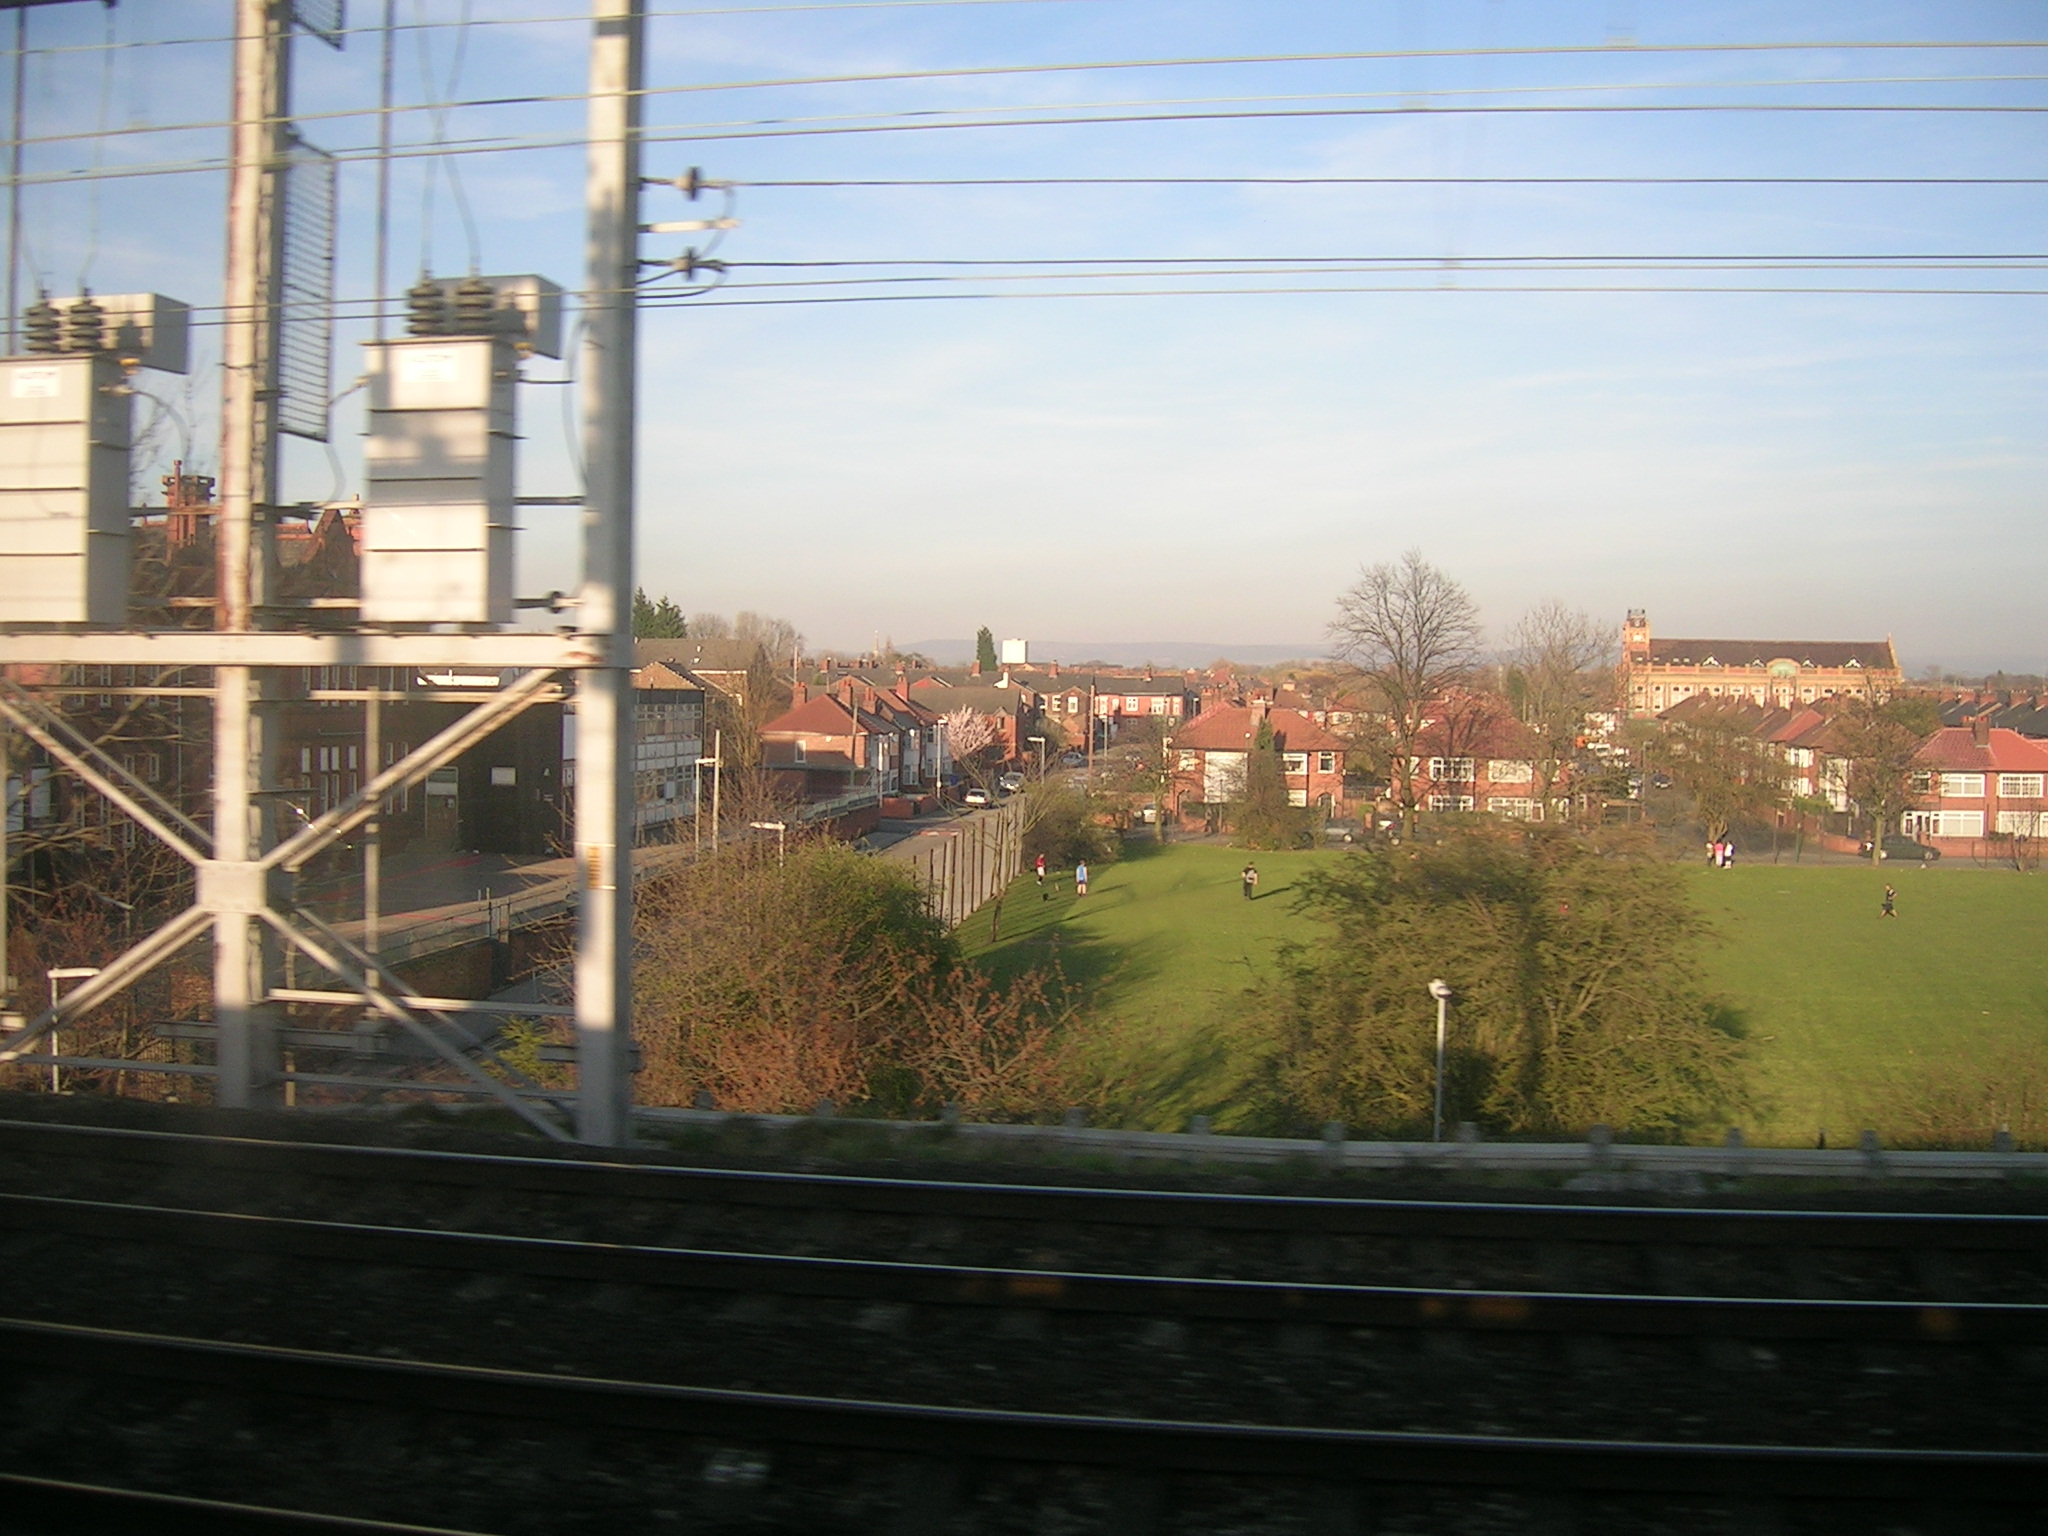 a train travels along the tracks past several buildings and a green field